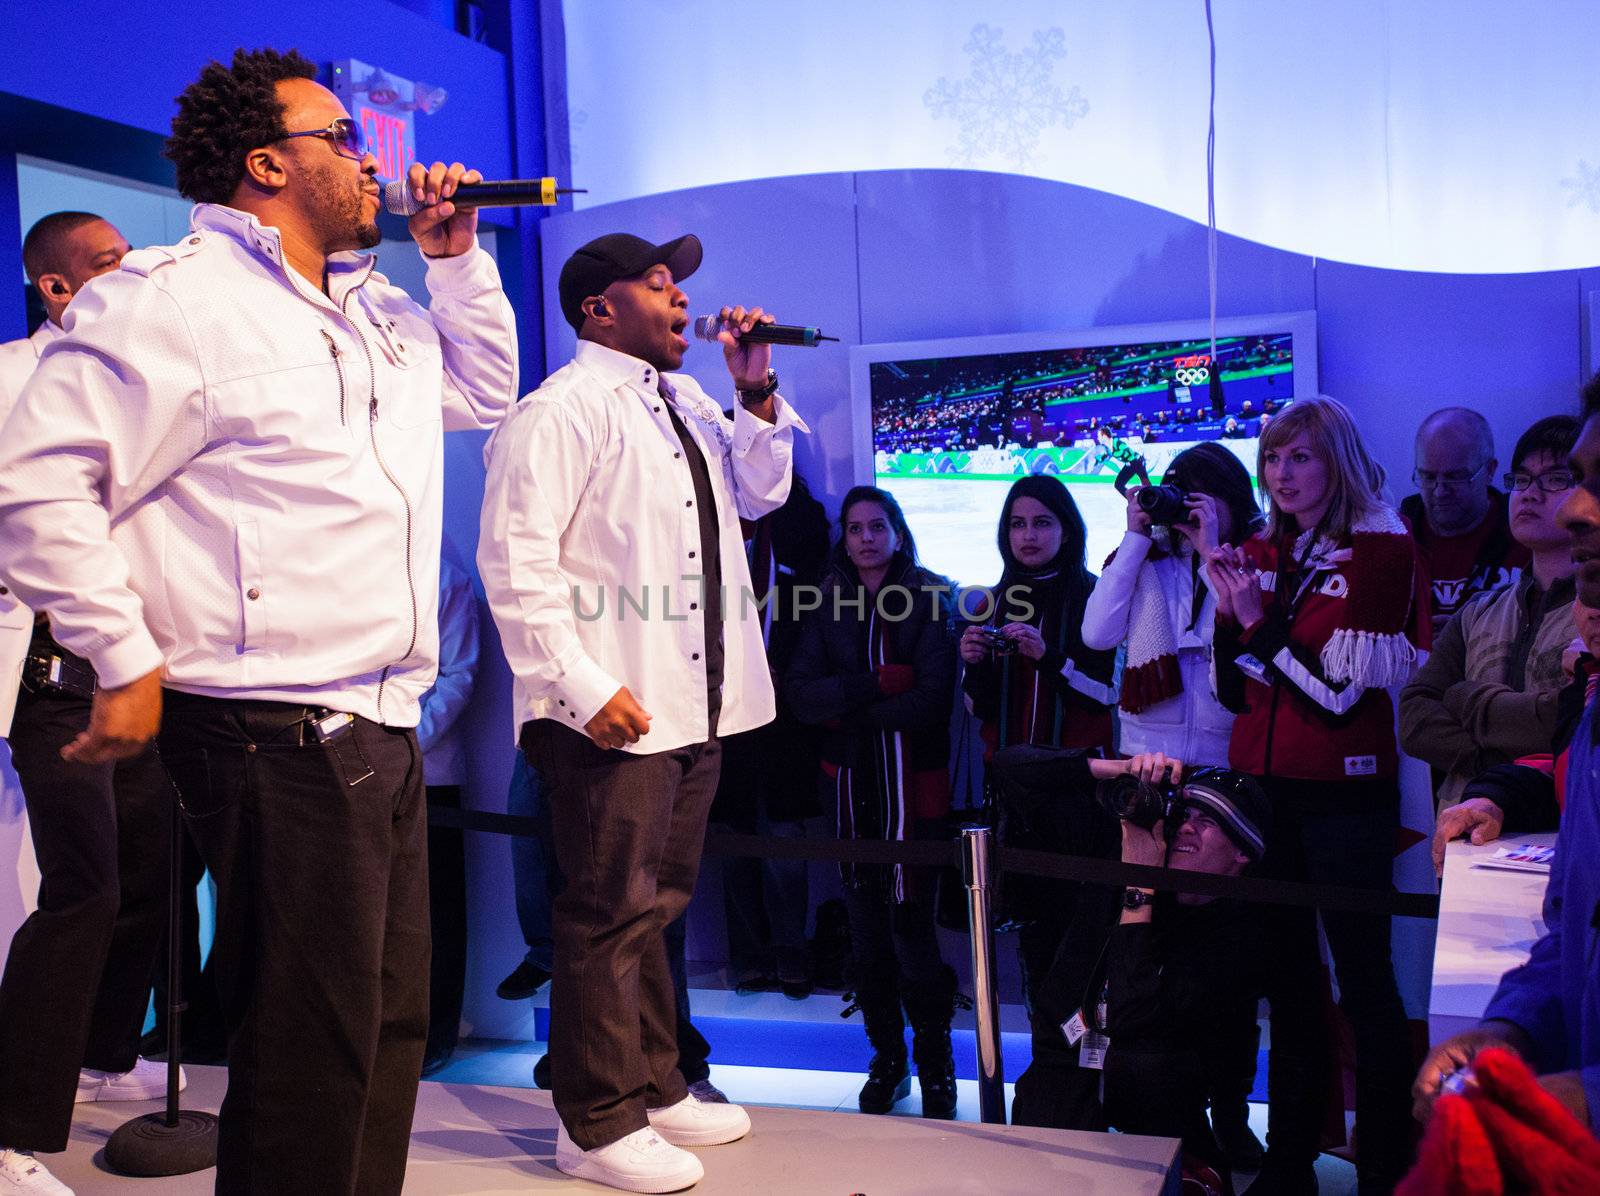 VANCOUVER, BC - FEBRUARY 2010 - Naturally 7 performs at the Bell Ice Cube during Vancouver's 2010 Olympic Games